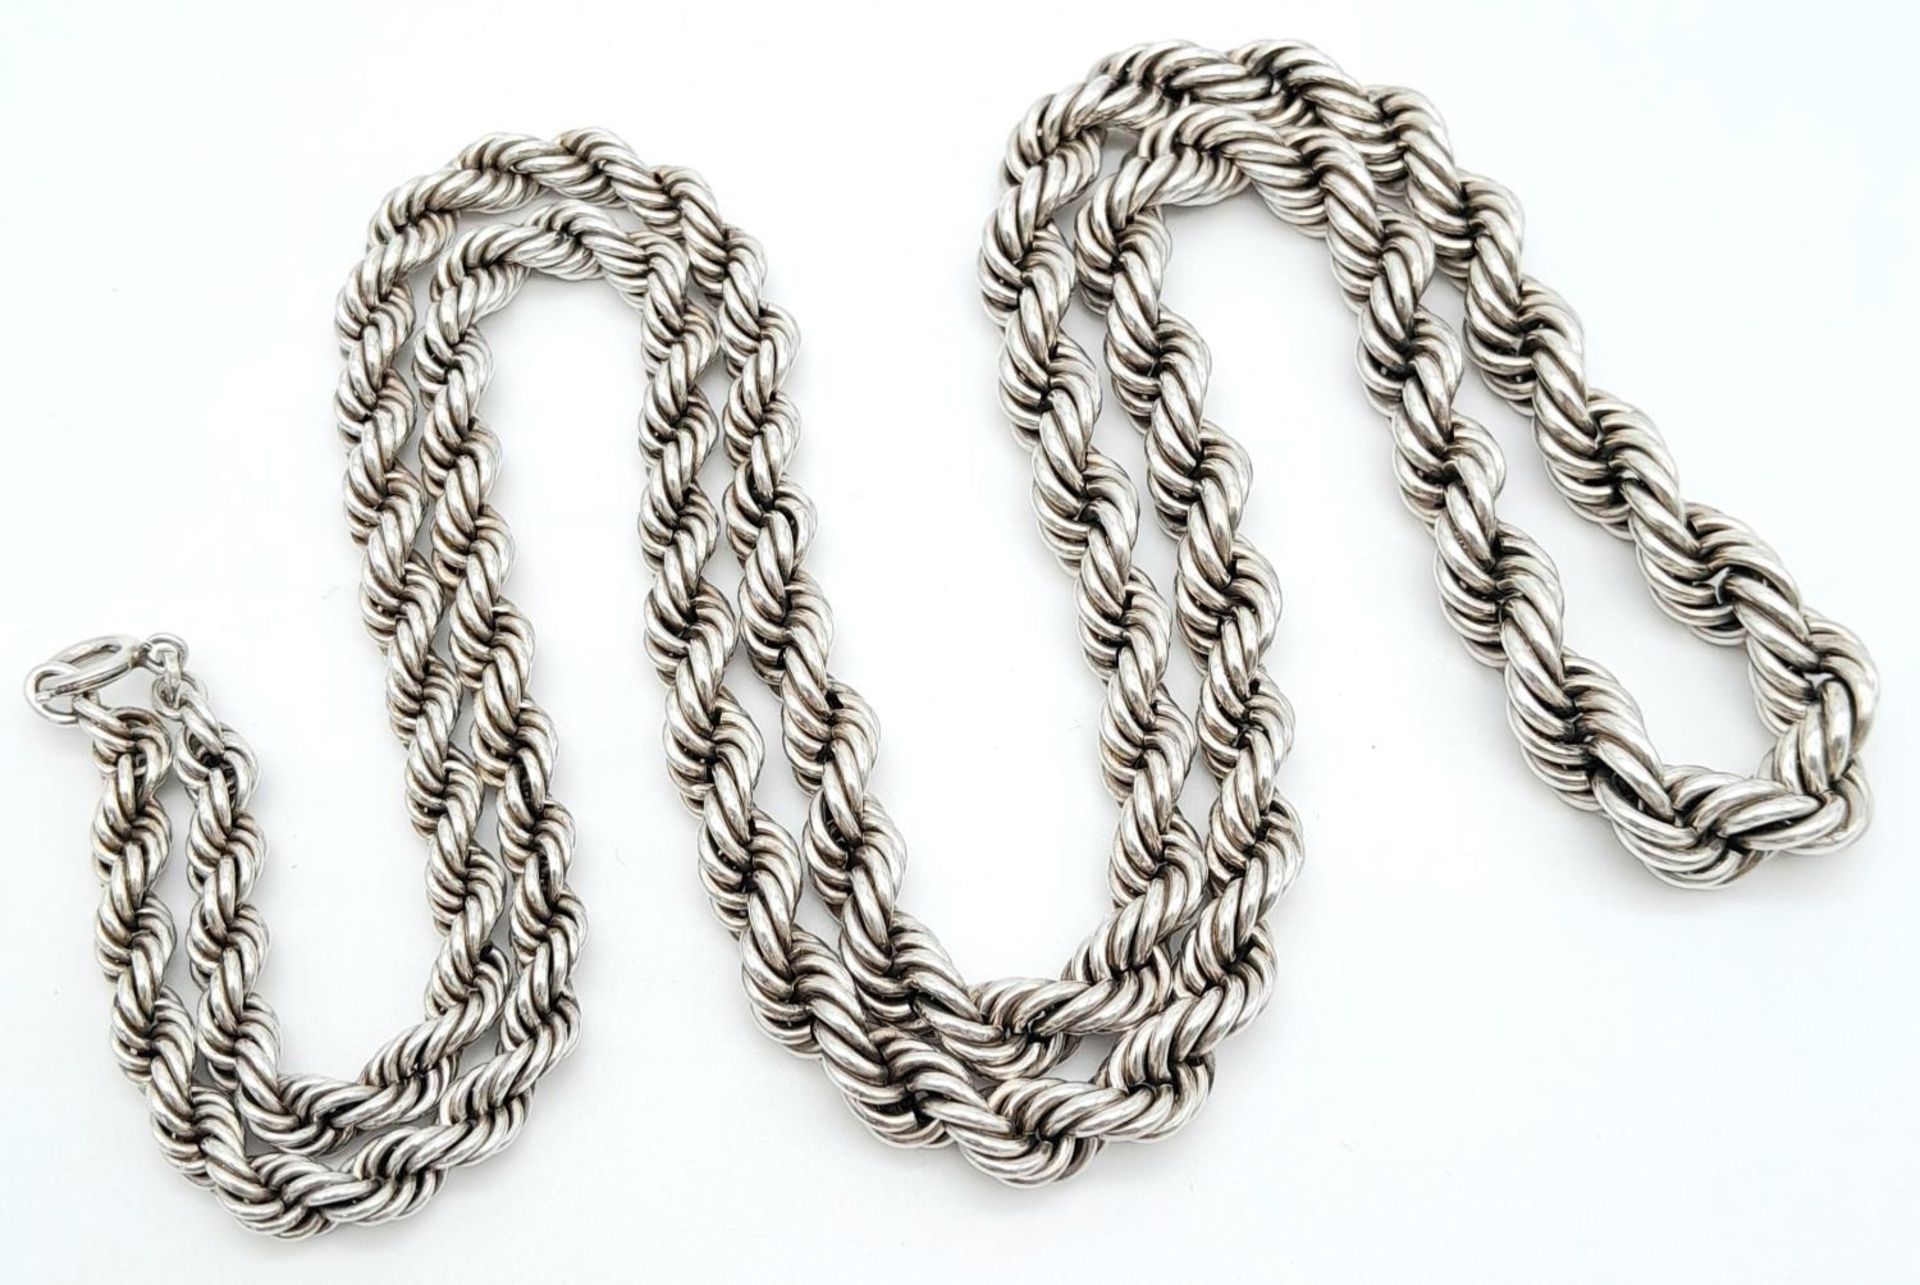 A 925 Silver Graduated Rope Chain Necklace. 89cm length, 80.48g weight.